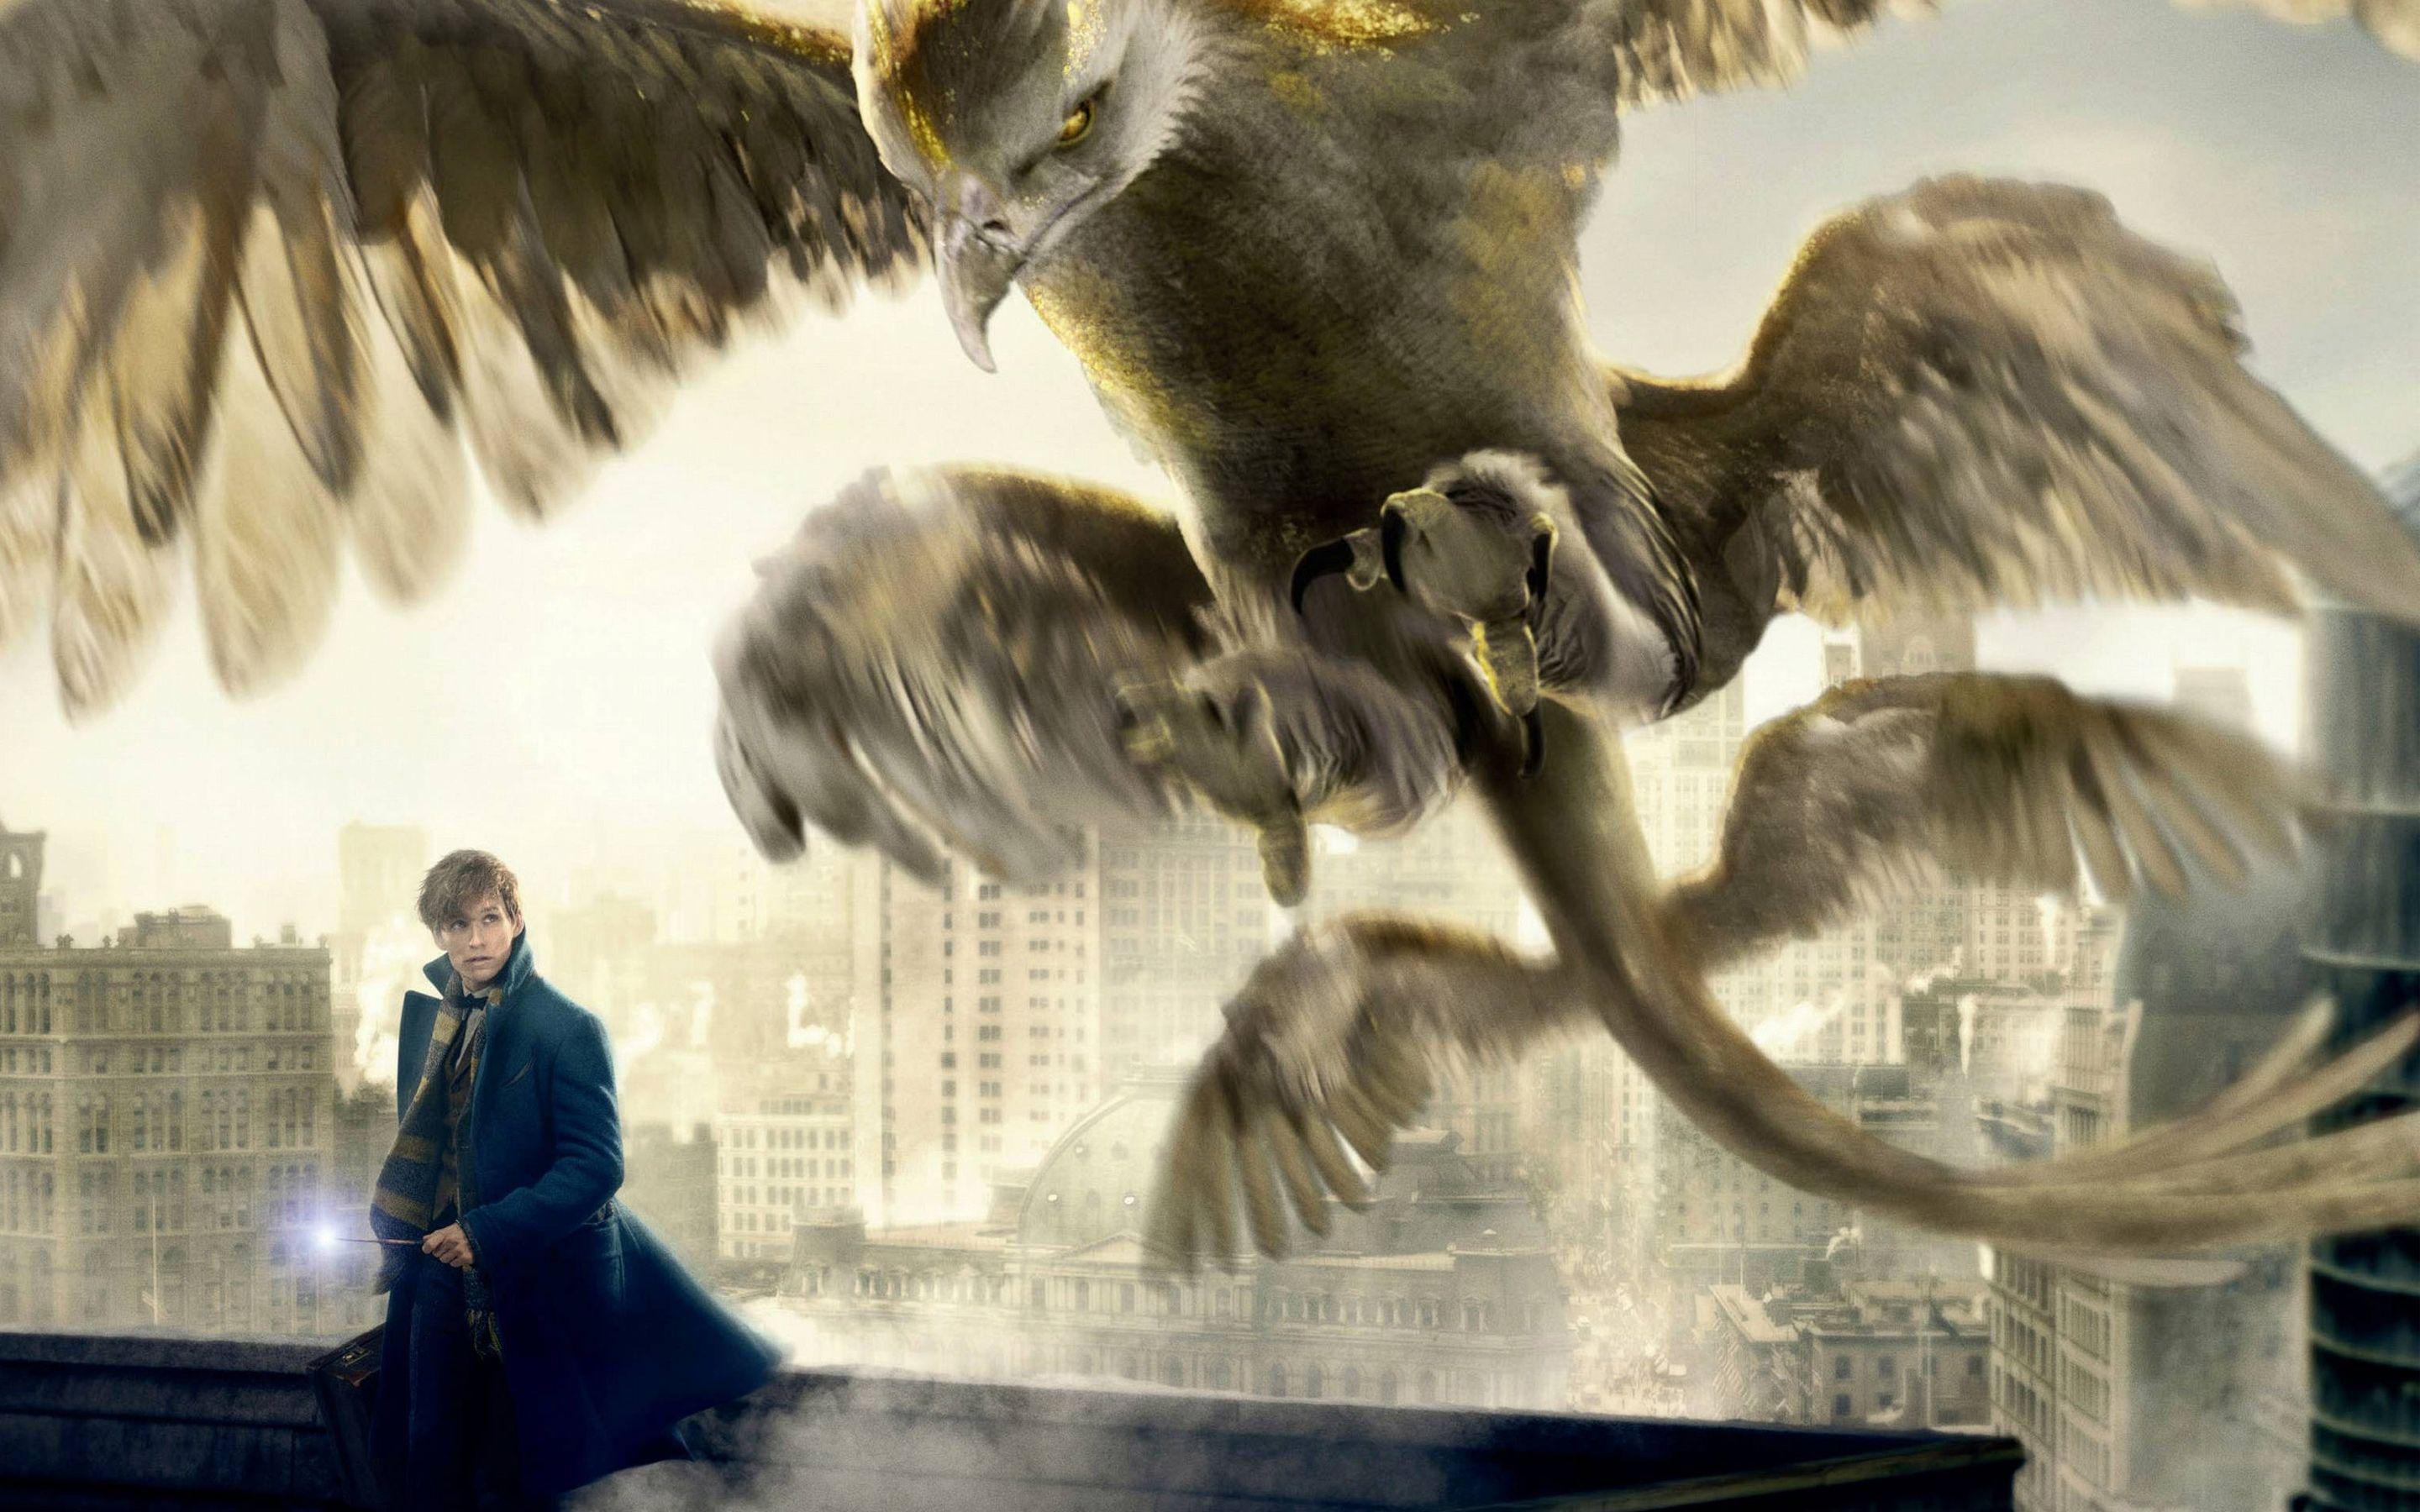 Download 2880x1800 Fantastic Beasts And Where To Find Them